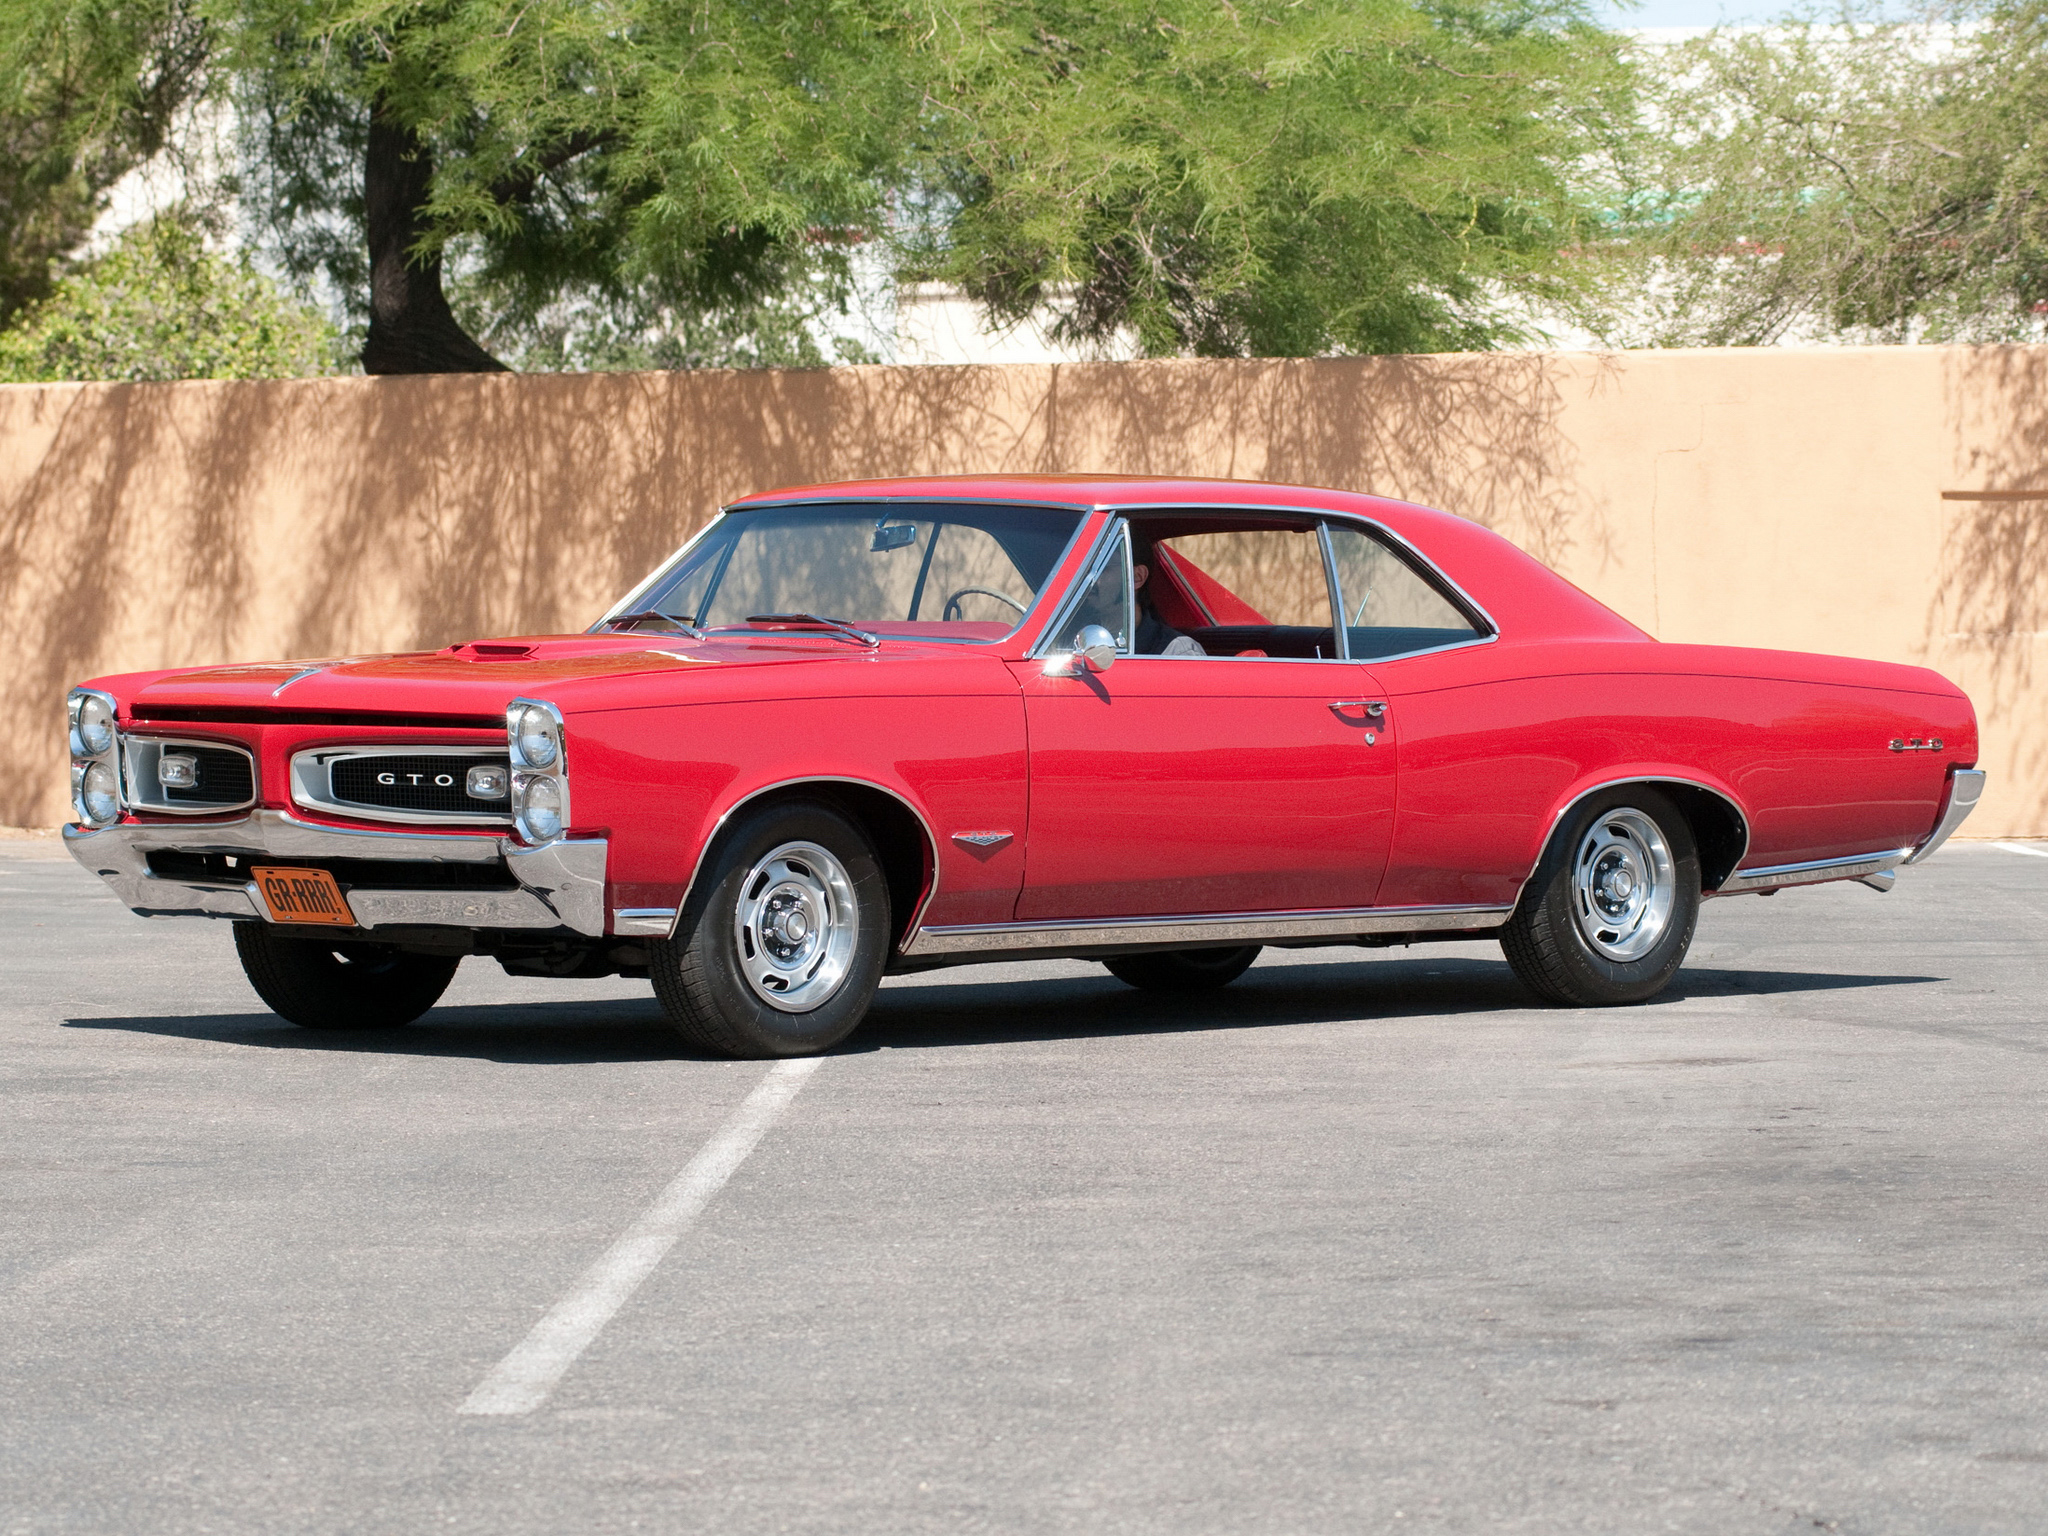 1966, Pontiac, Tempest, Gto, Hardtop, Coupe, Muscle, Classic Wallpaper